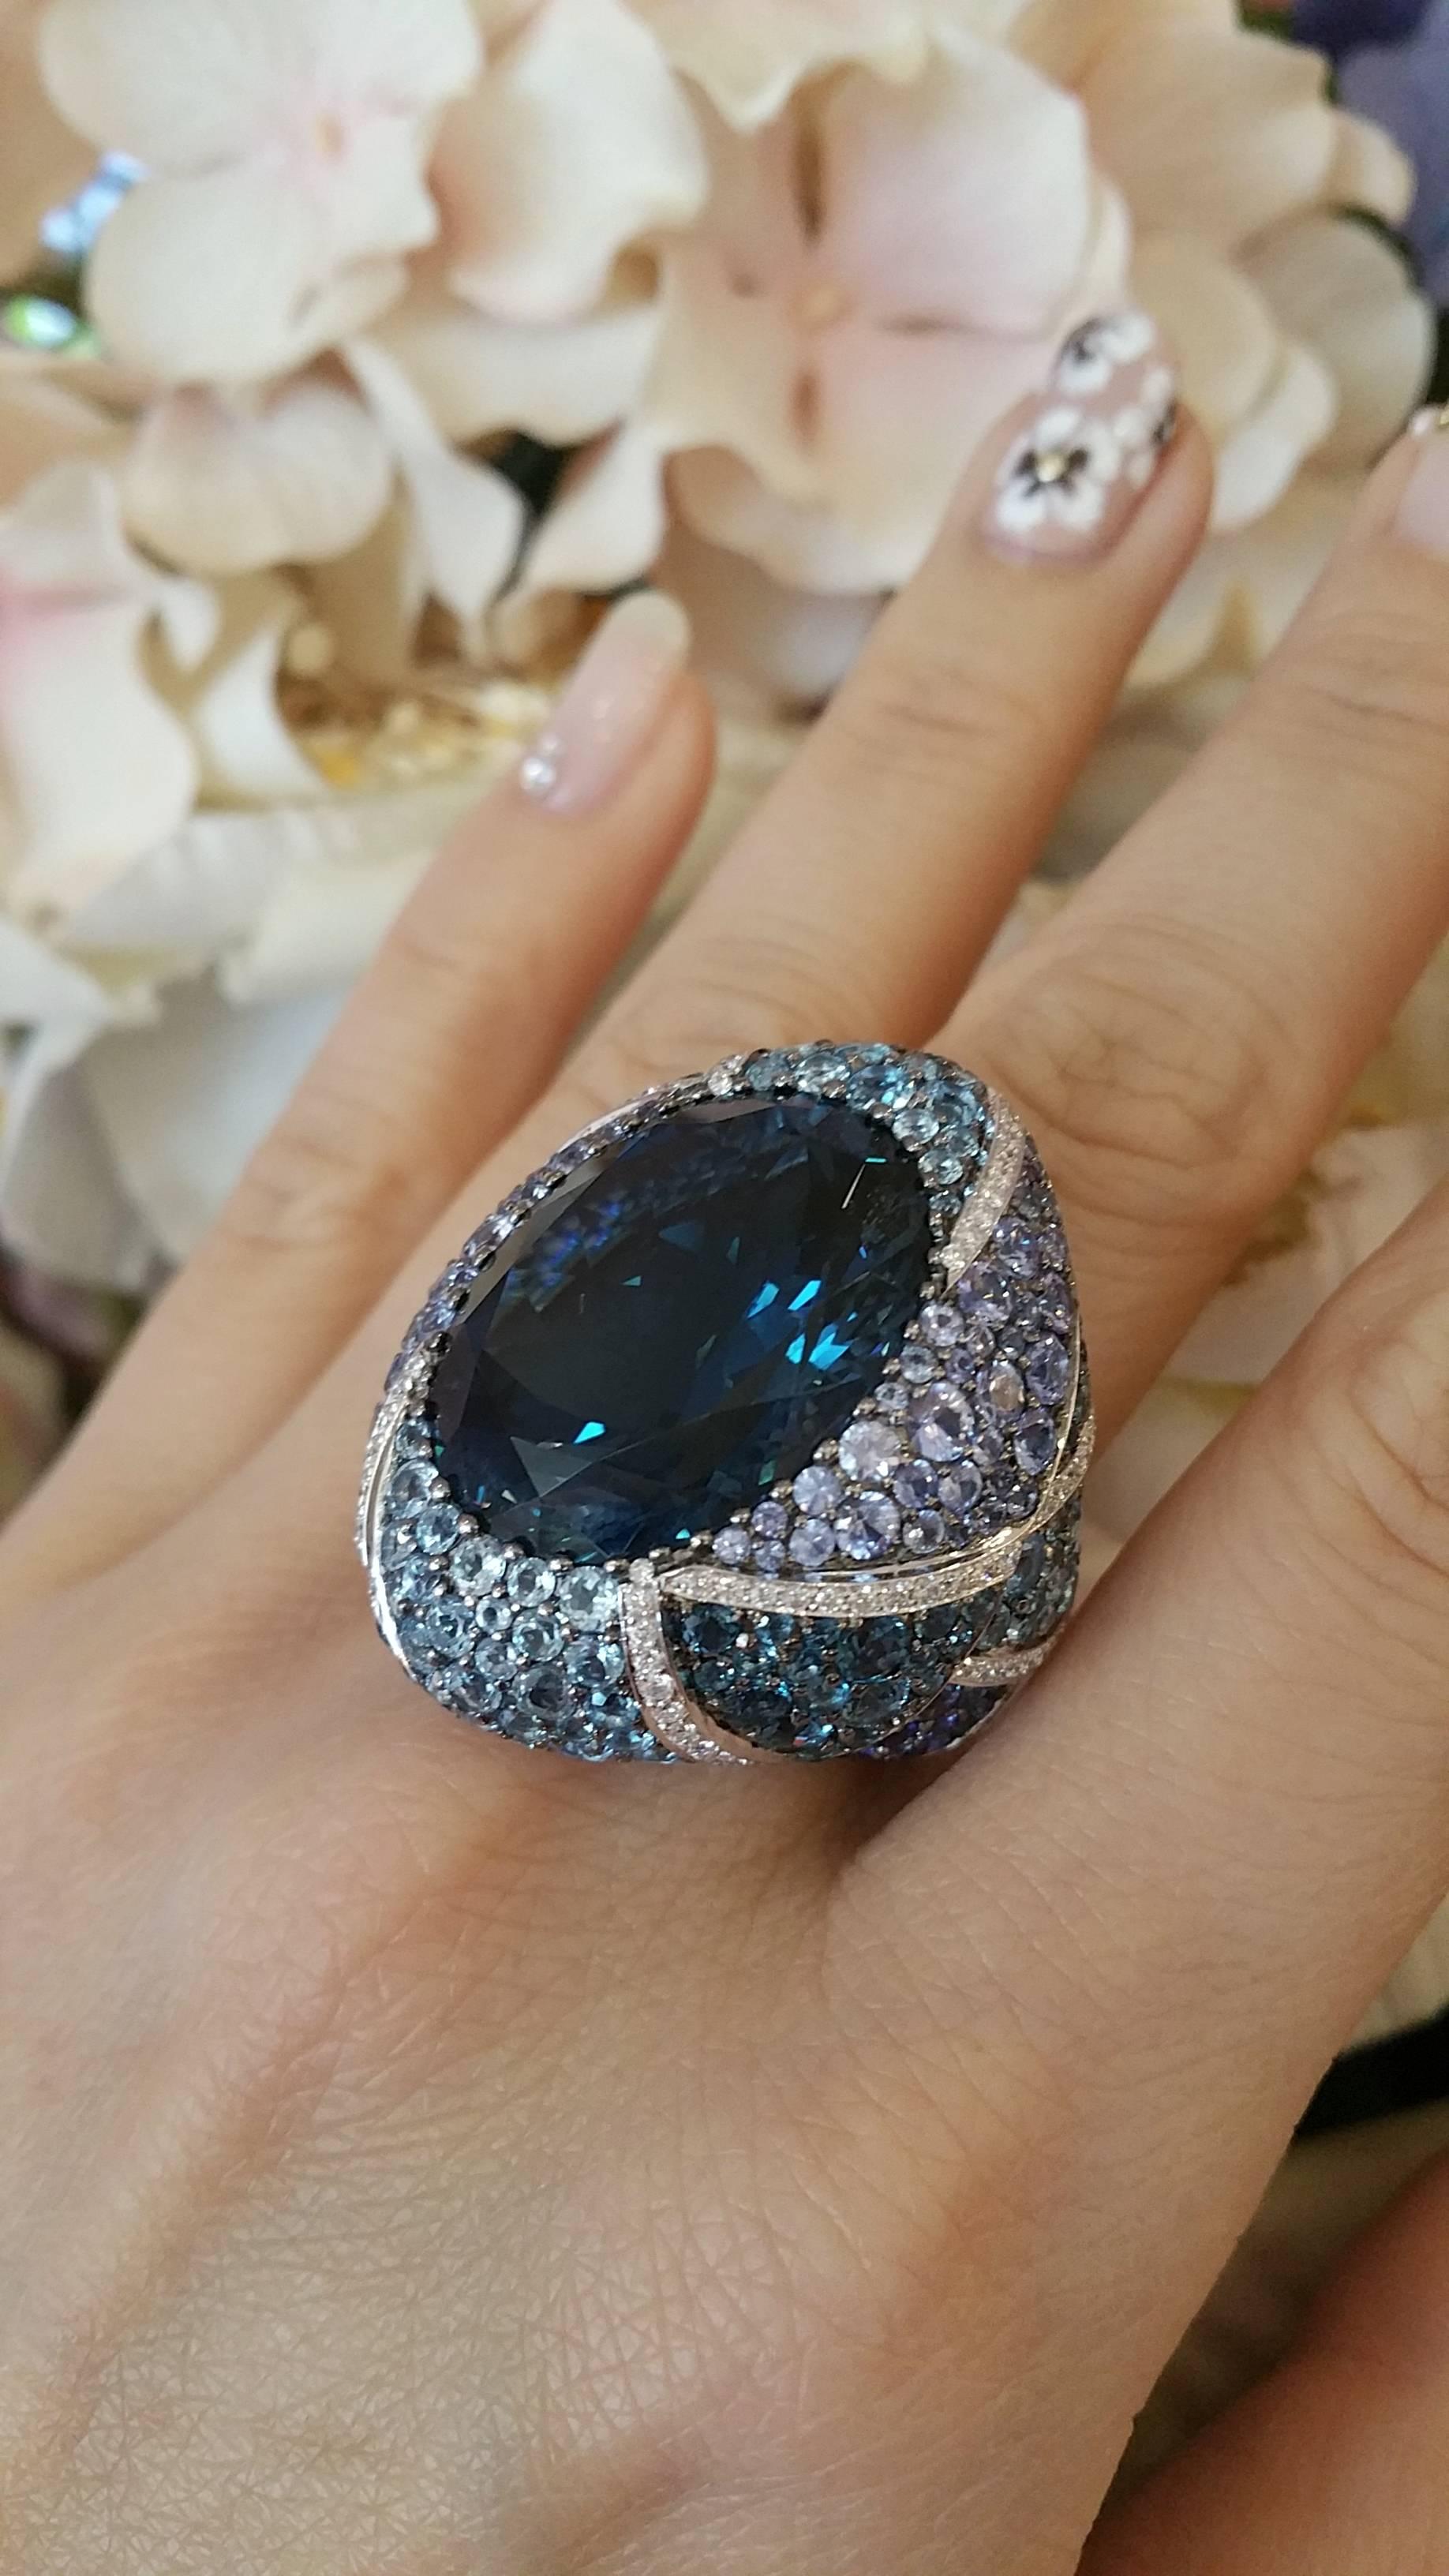 Large Dome Ring with Oval Blue Topaz in the center, surrounded by light and dark shades of Sapphires and Blue topaz stones, pave set over most of the ring. Wonderful play of colors, separated by lines of diamonds.

Blue Topaz weight is 40.49